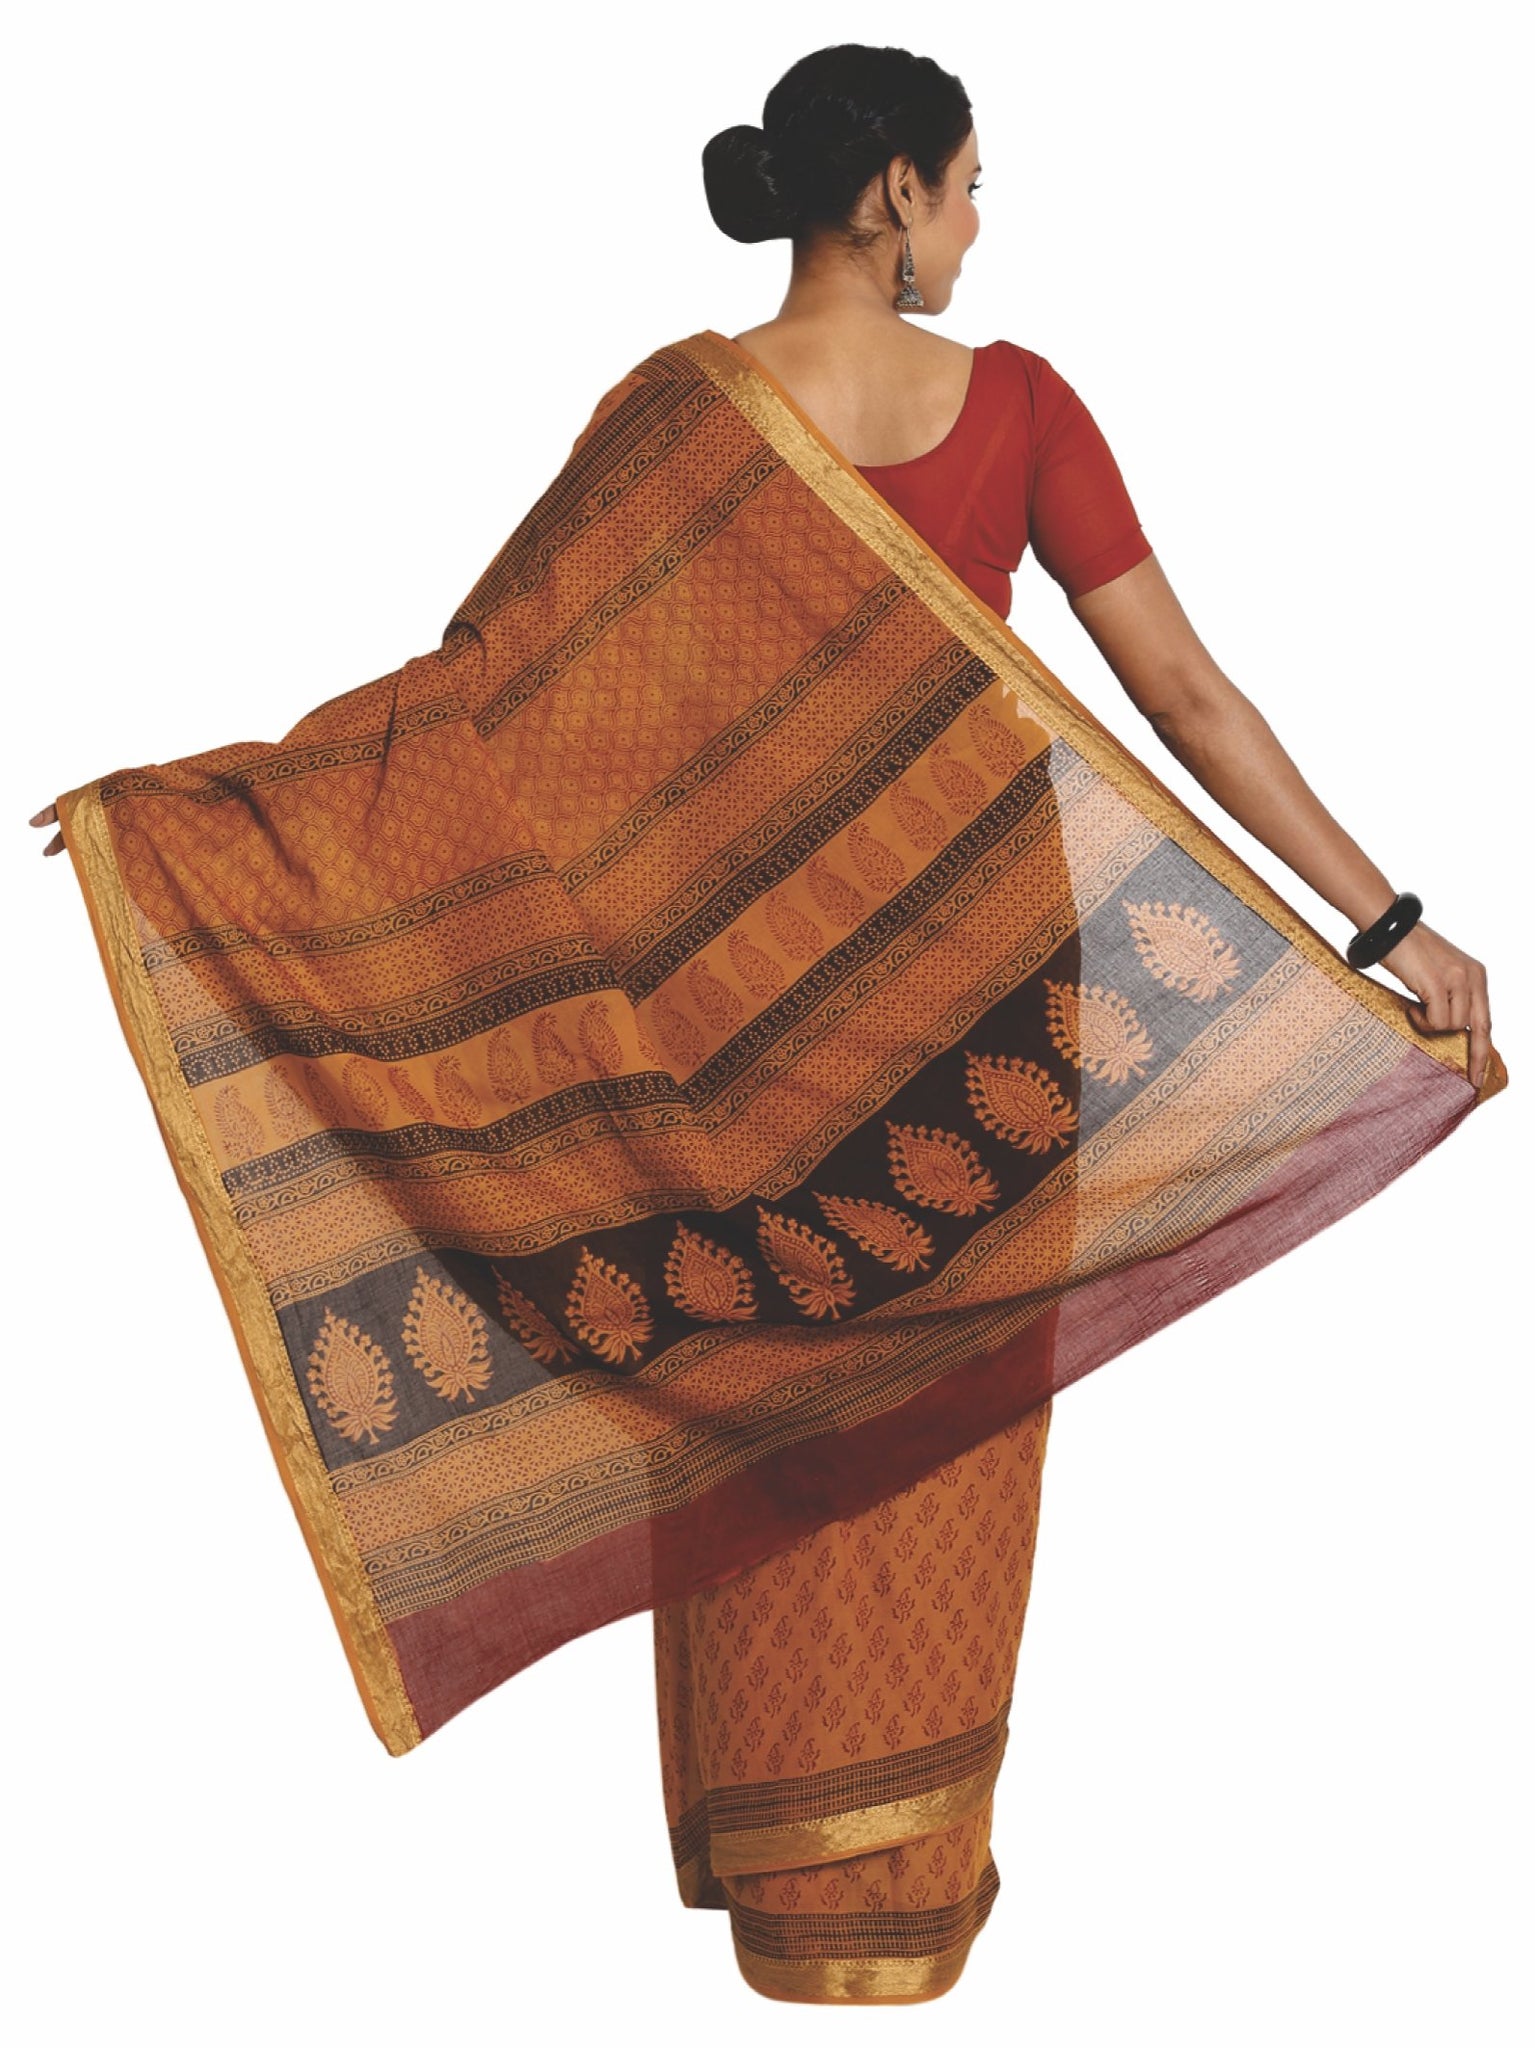 Rust Orange Cotton Hand Block Bagh Print Handcrafted Saree-Saree-Kalakari India-ZIBASA0064-Bagh, Cotton, Geographical Indication, Hand Blocks, Hand Crafted, Heritage Prints, Natural Dyes, Sarees, Sustainable Fabrics-[Linen,Ethnic,wear,Fashionista,Handloom,Handicraft,Indigo,blockprint,block,print,Cotton,Chanderi,Blue, latest,classy,party,bollywood,trendy,summer,style,traditional,formal,elegant,unique,style,hand,block,print, dabu,booti,gift,present,glamorous,affordable,collectible,Sari,Saree,print